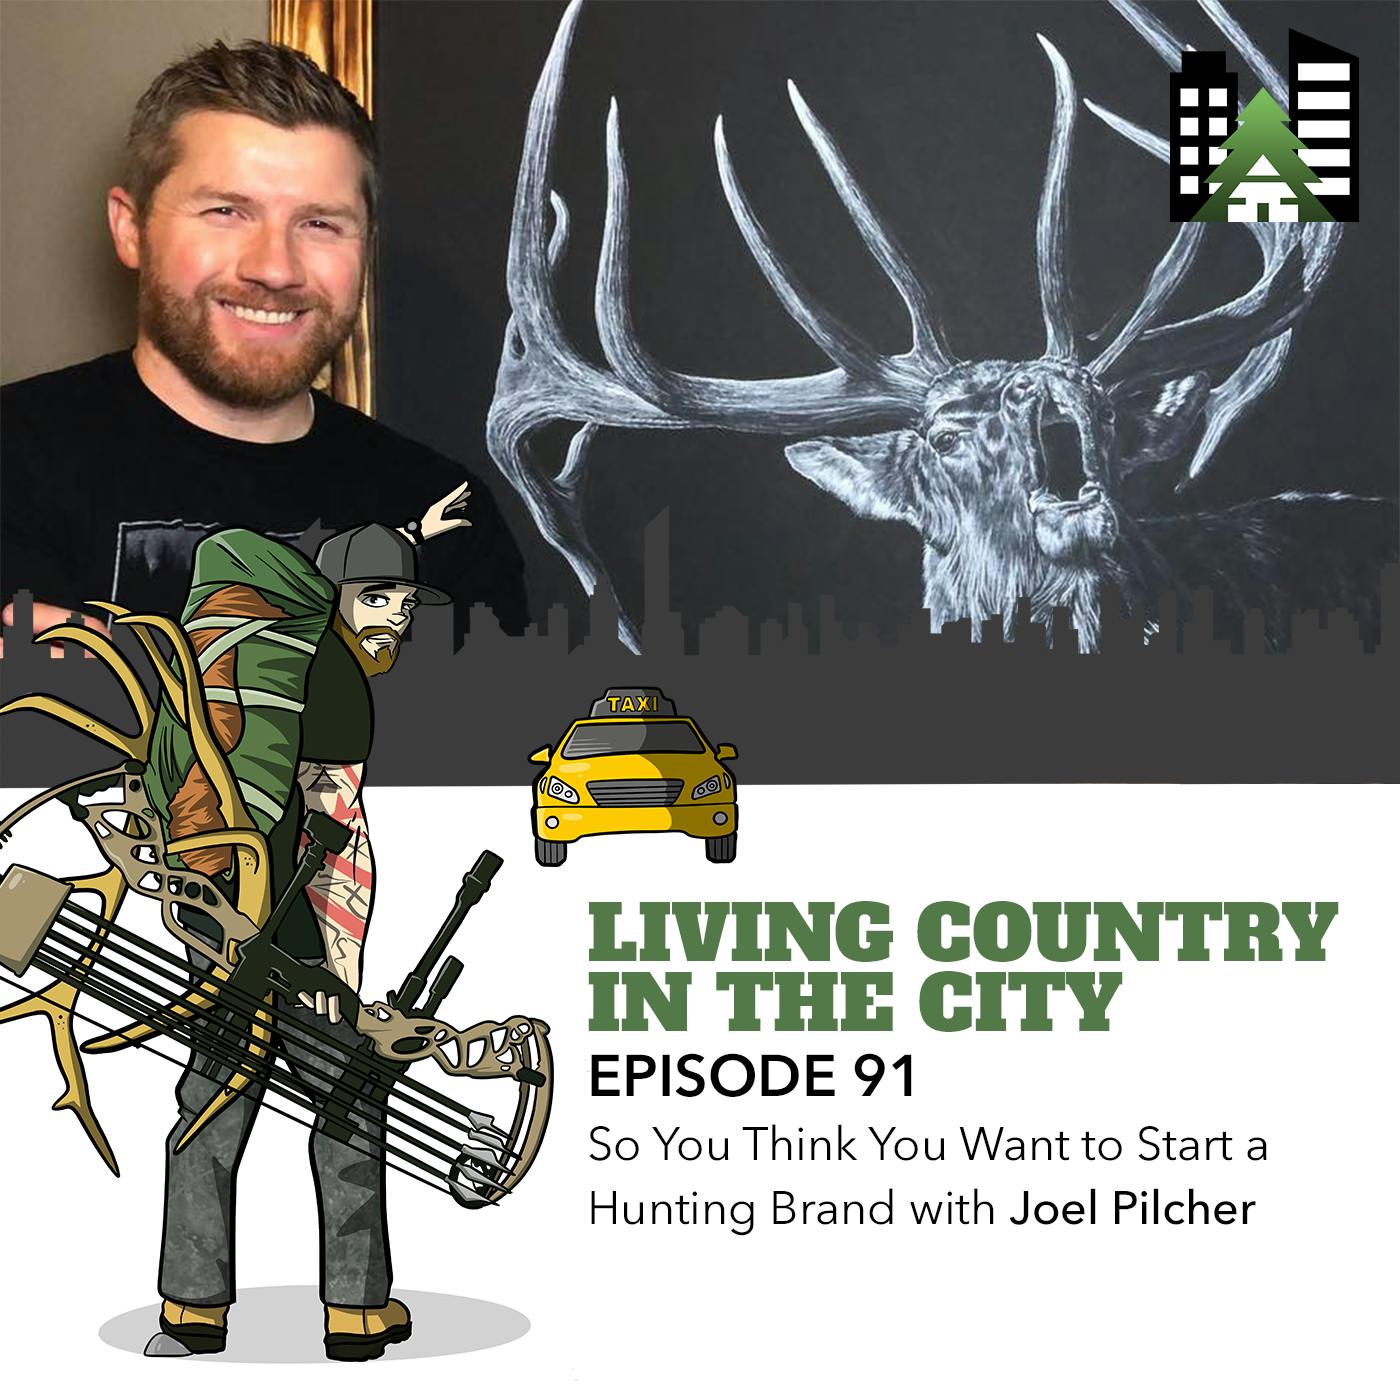 Ep 91 - So You Think You Want to Start a Hunting Brand with Joel Pilcher